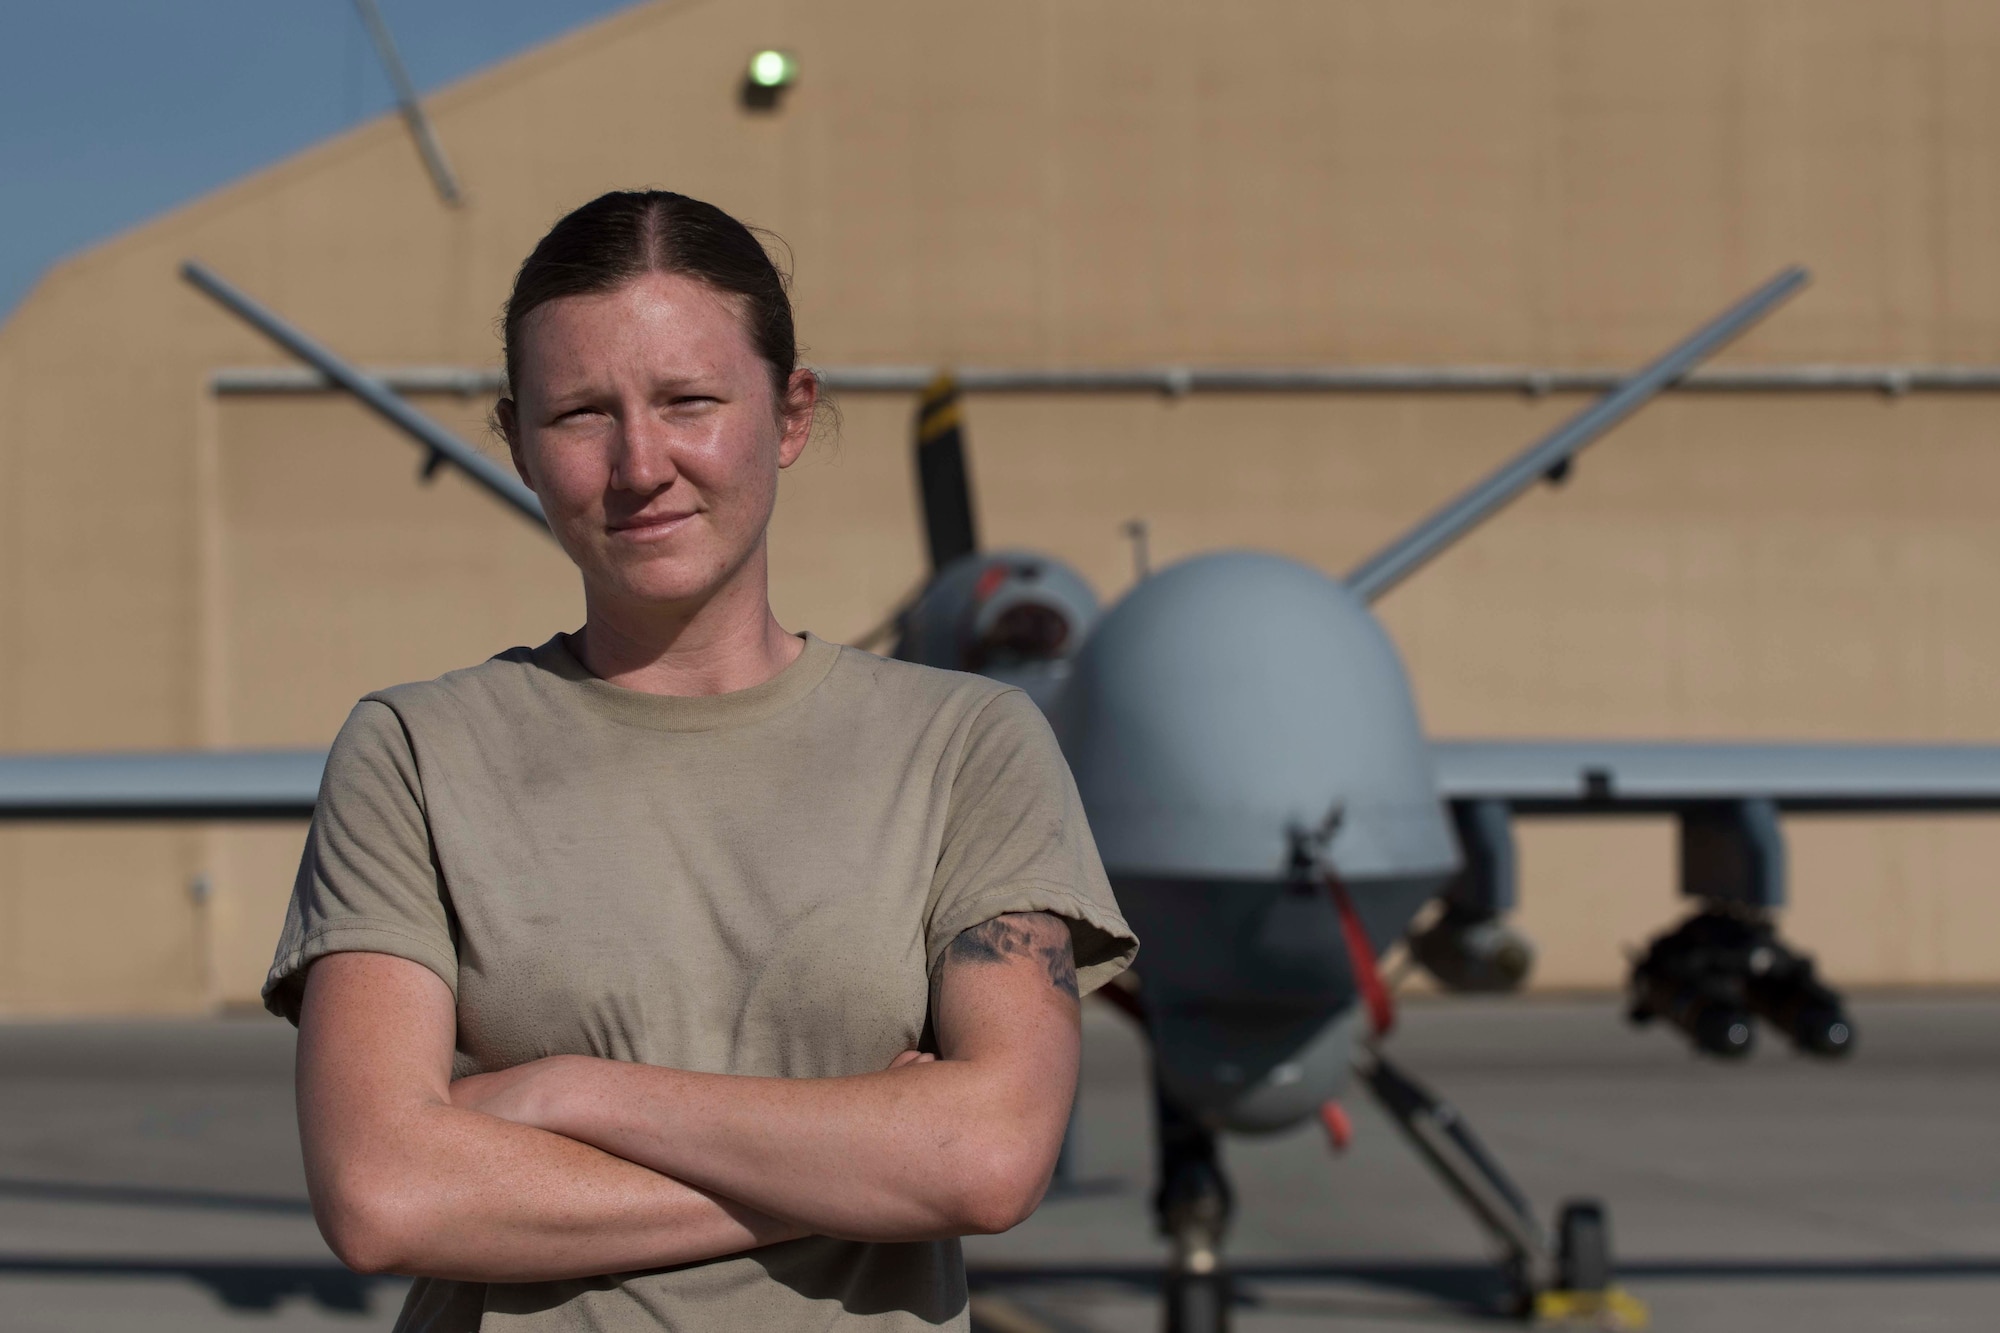 From executing deliberate strikes to performing close air support and complete aerial reconnaissance, the Air Force is taking a new approach to the multirole capacity of the MQ-9 Reaper unmanned aircraft.